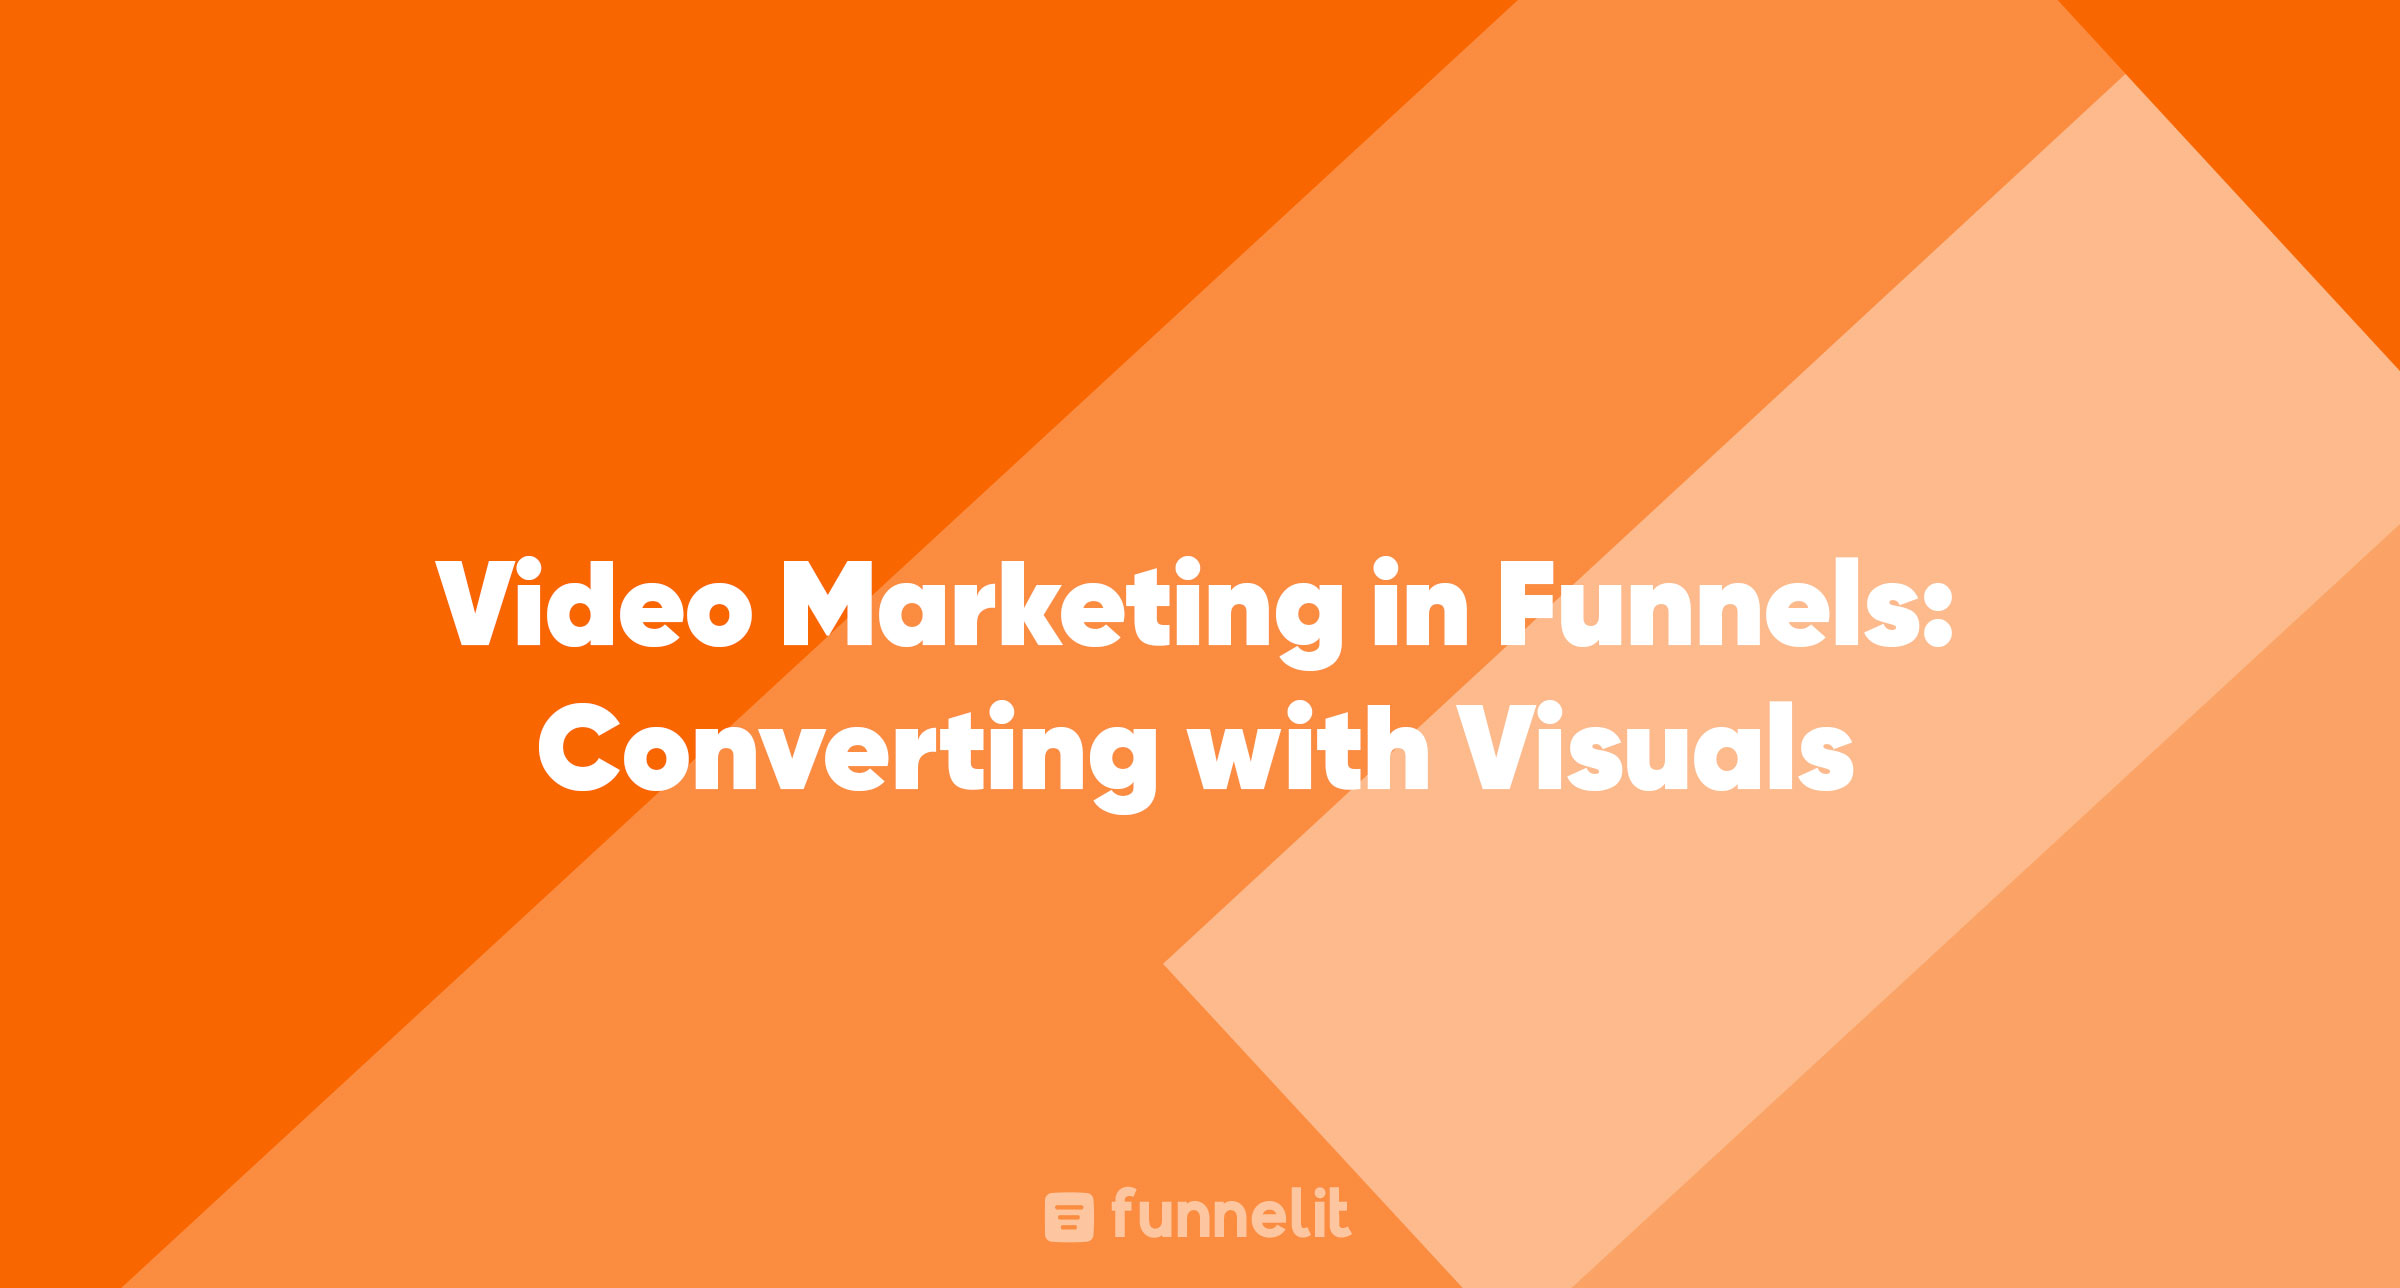 Article | Video Marketing in Funnels: Converting with Visuals